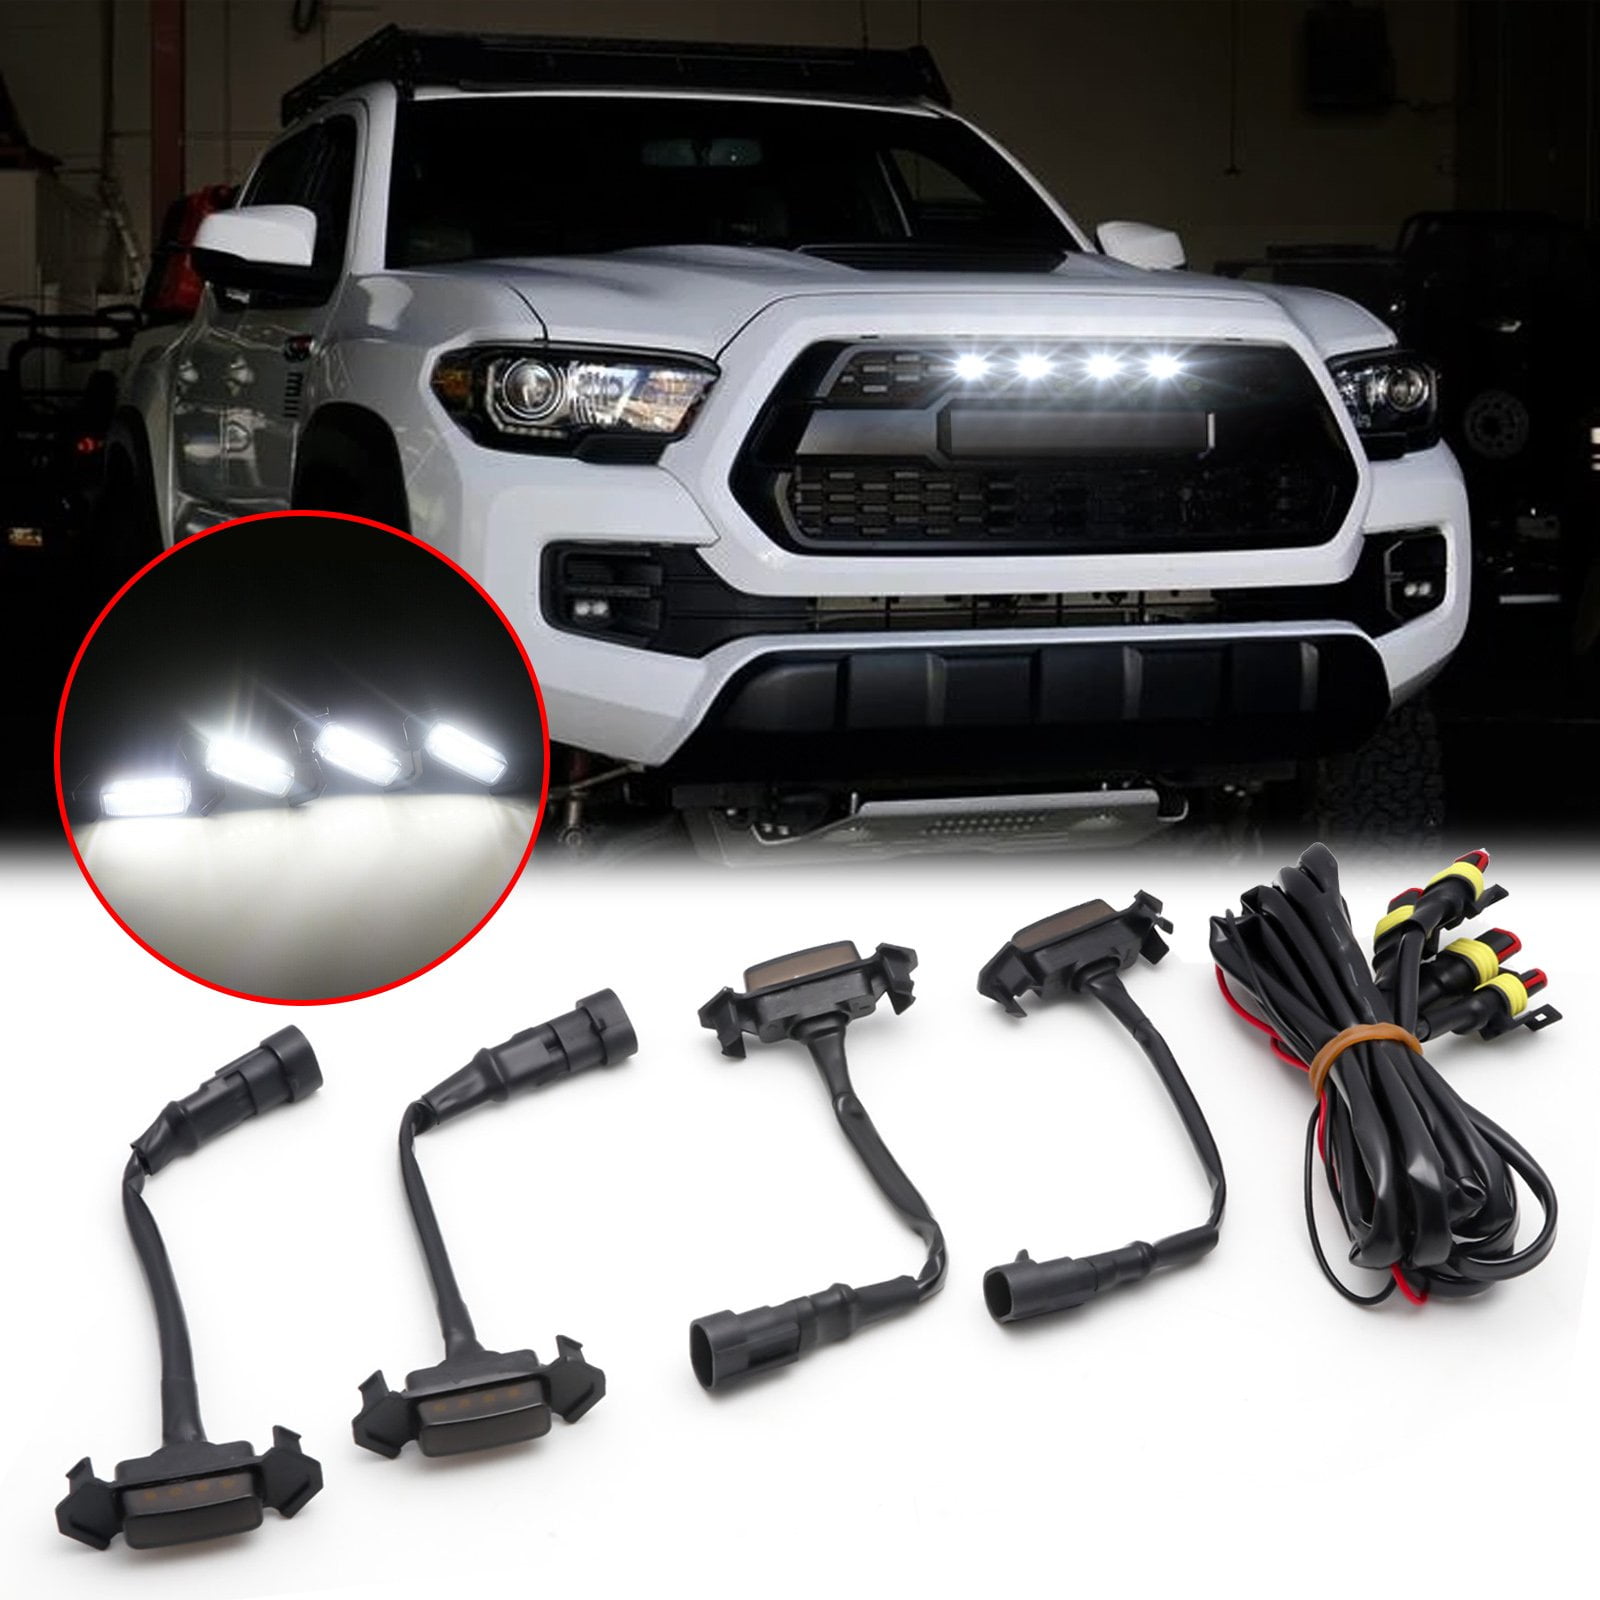 4-SMD 6000K White LED Light Assy & Wiring Harness 4 Includes iJDMTOY 4pc Set Smoked Lens Front Grille Lighting Kit Compatible With 2016-up Toyota Tacoma w/TRD Pro Grill ONLY 